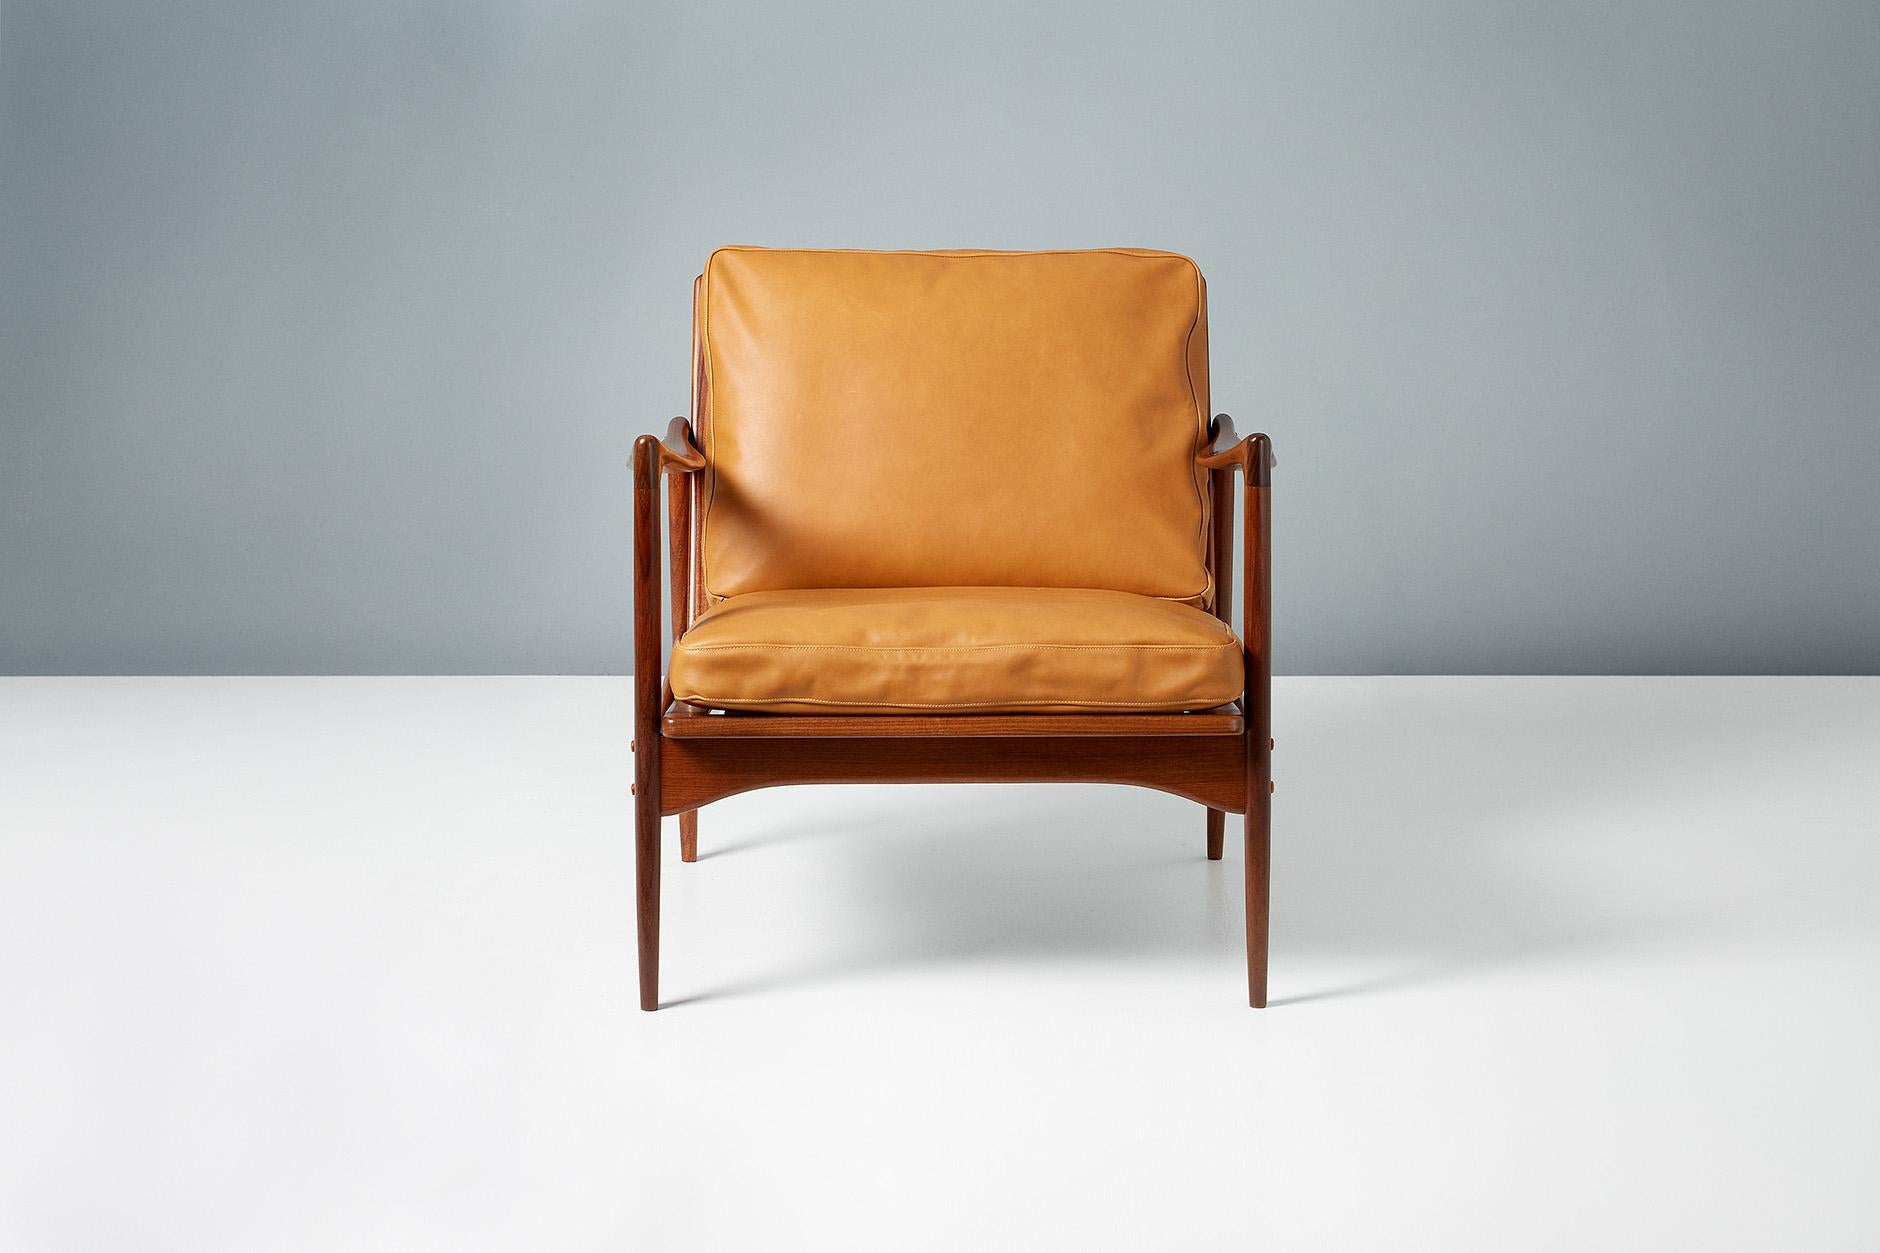 A pair of Afromosia African teak 'Kandidaten', (Candidate), lounge chairs produced by Olof Perssons Fatoljindustri (O.P.E.) in Jonkoping, Sweden, circa 1960. 

Danish master Ib Kofod-Larsen gained popularity in his native Denmark in the 1950s via